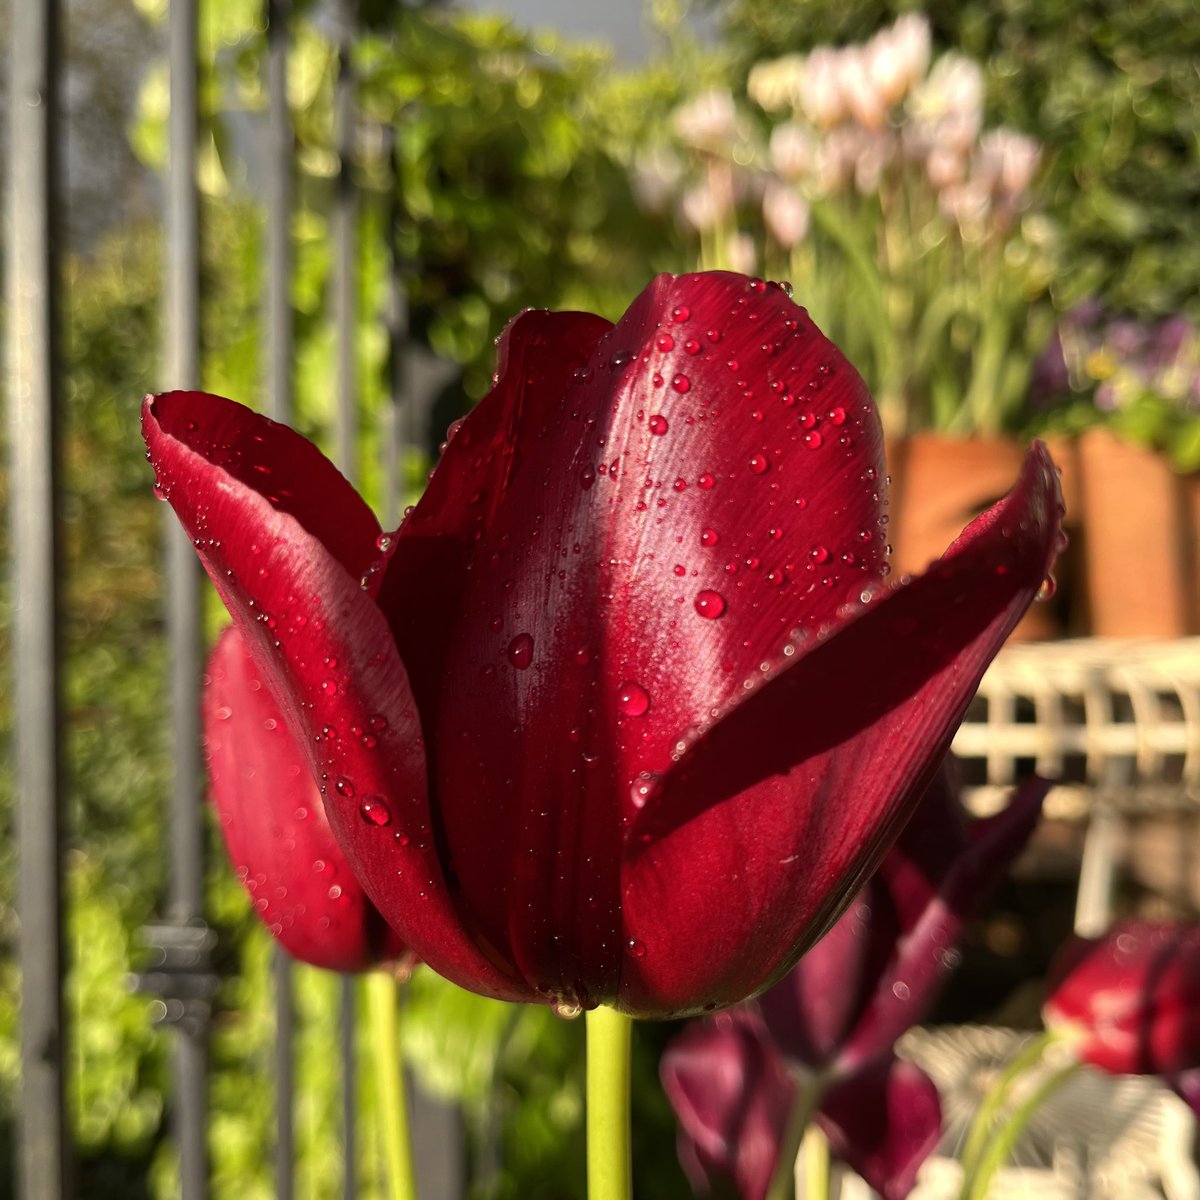 Tulips all over for another year… this was ‘National Velvet’ on a rainy day a few weeks ago! 💚 #TulipTuesday #inmygarden